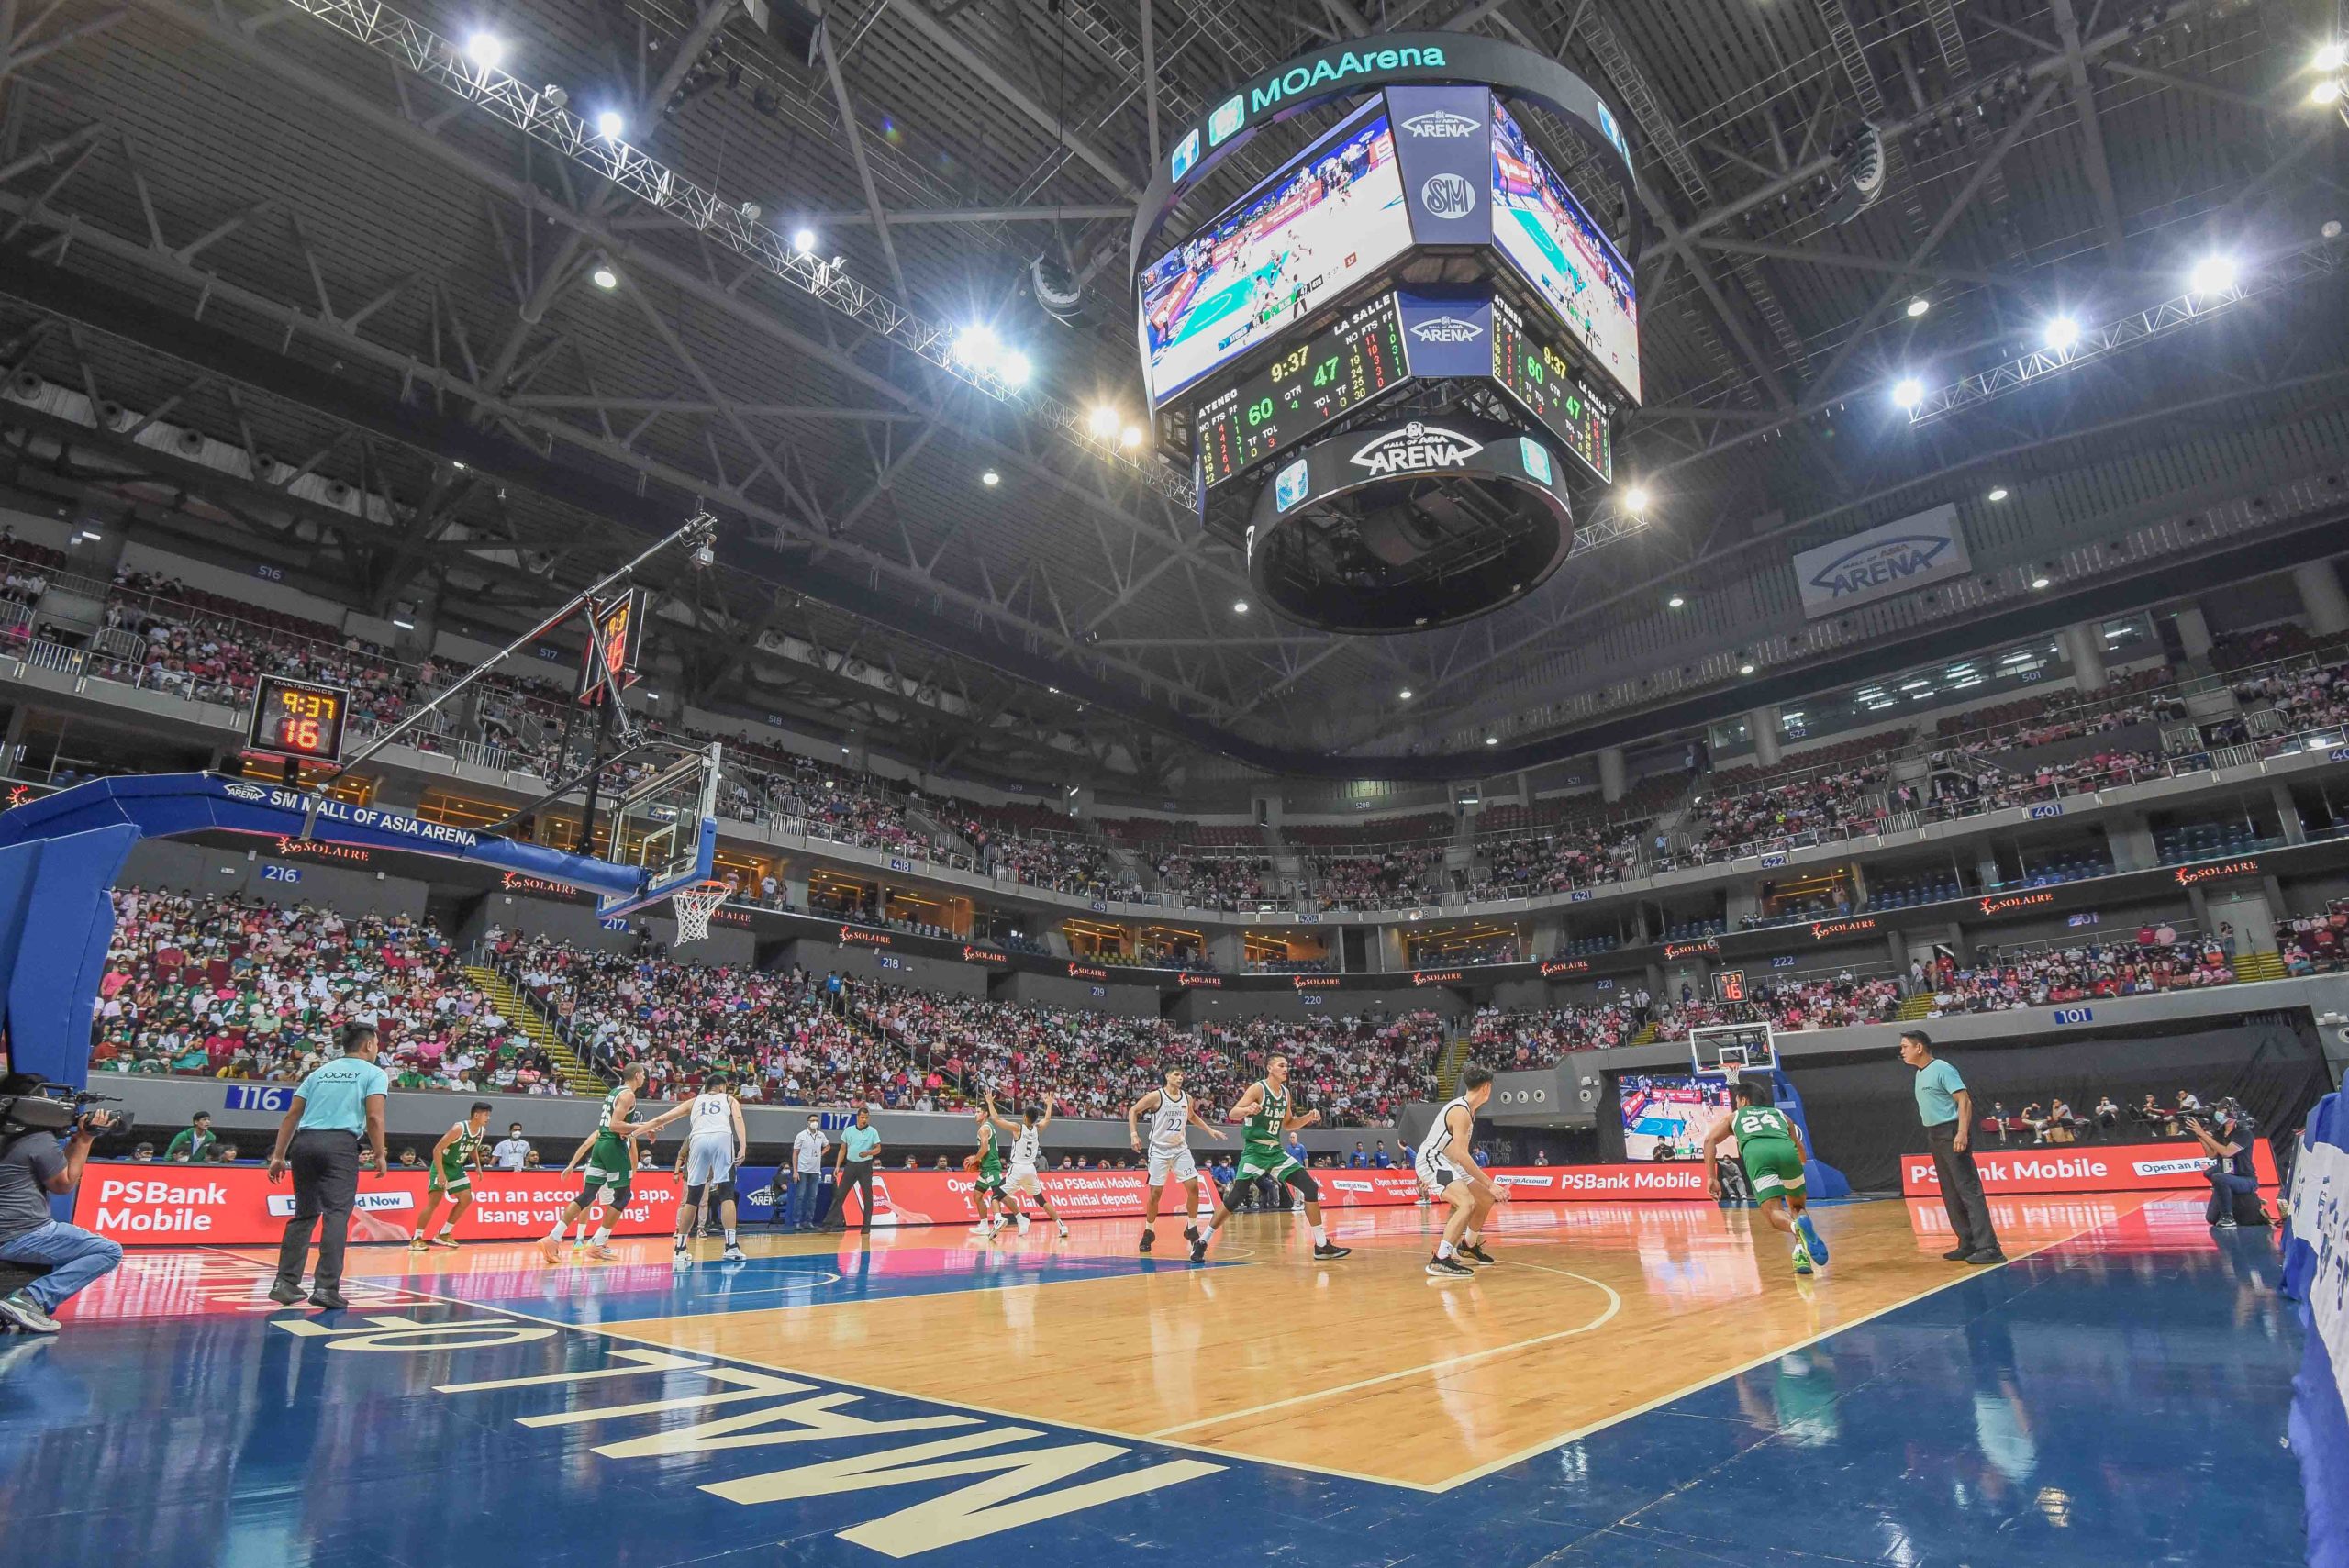 Crowd during the Ateneo-La Salle match in the UAAP Season 84. UAAP PHOTO